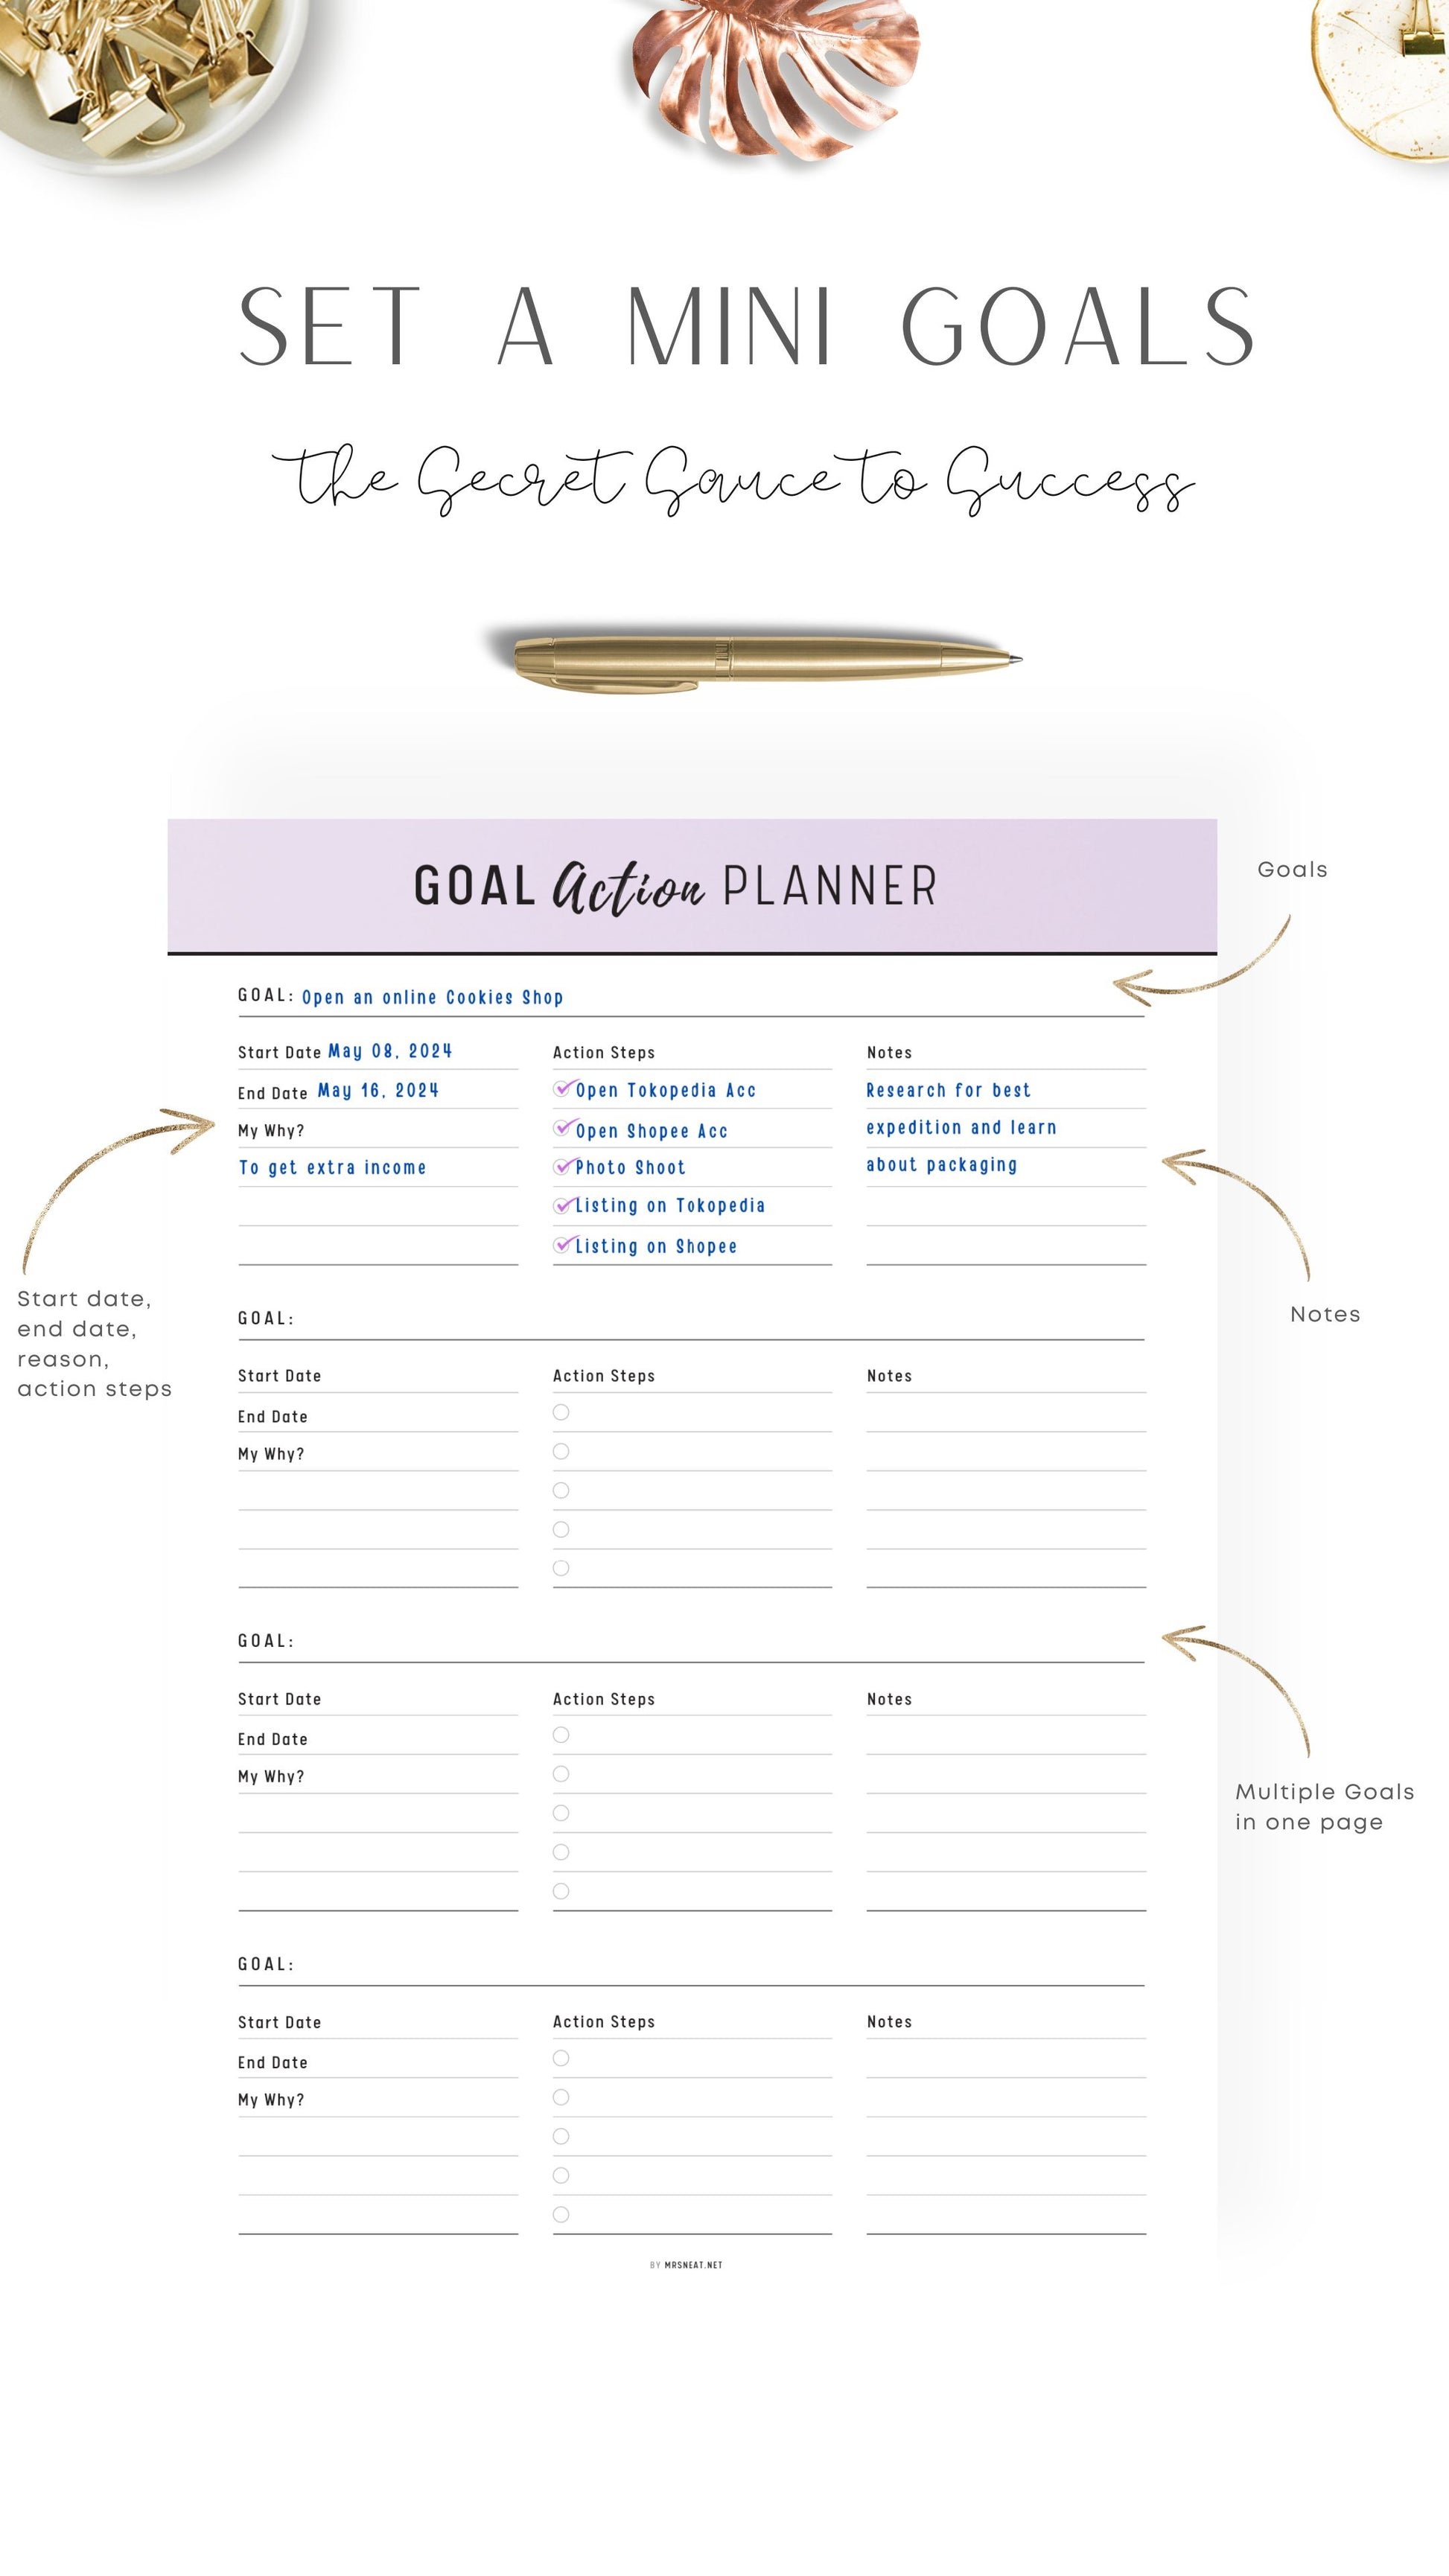 How to use Goal Action Planner Template Printable